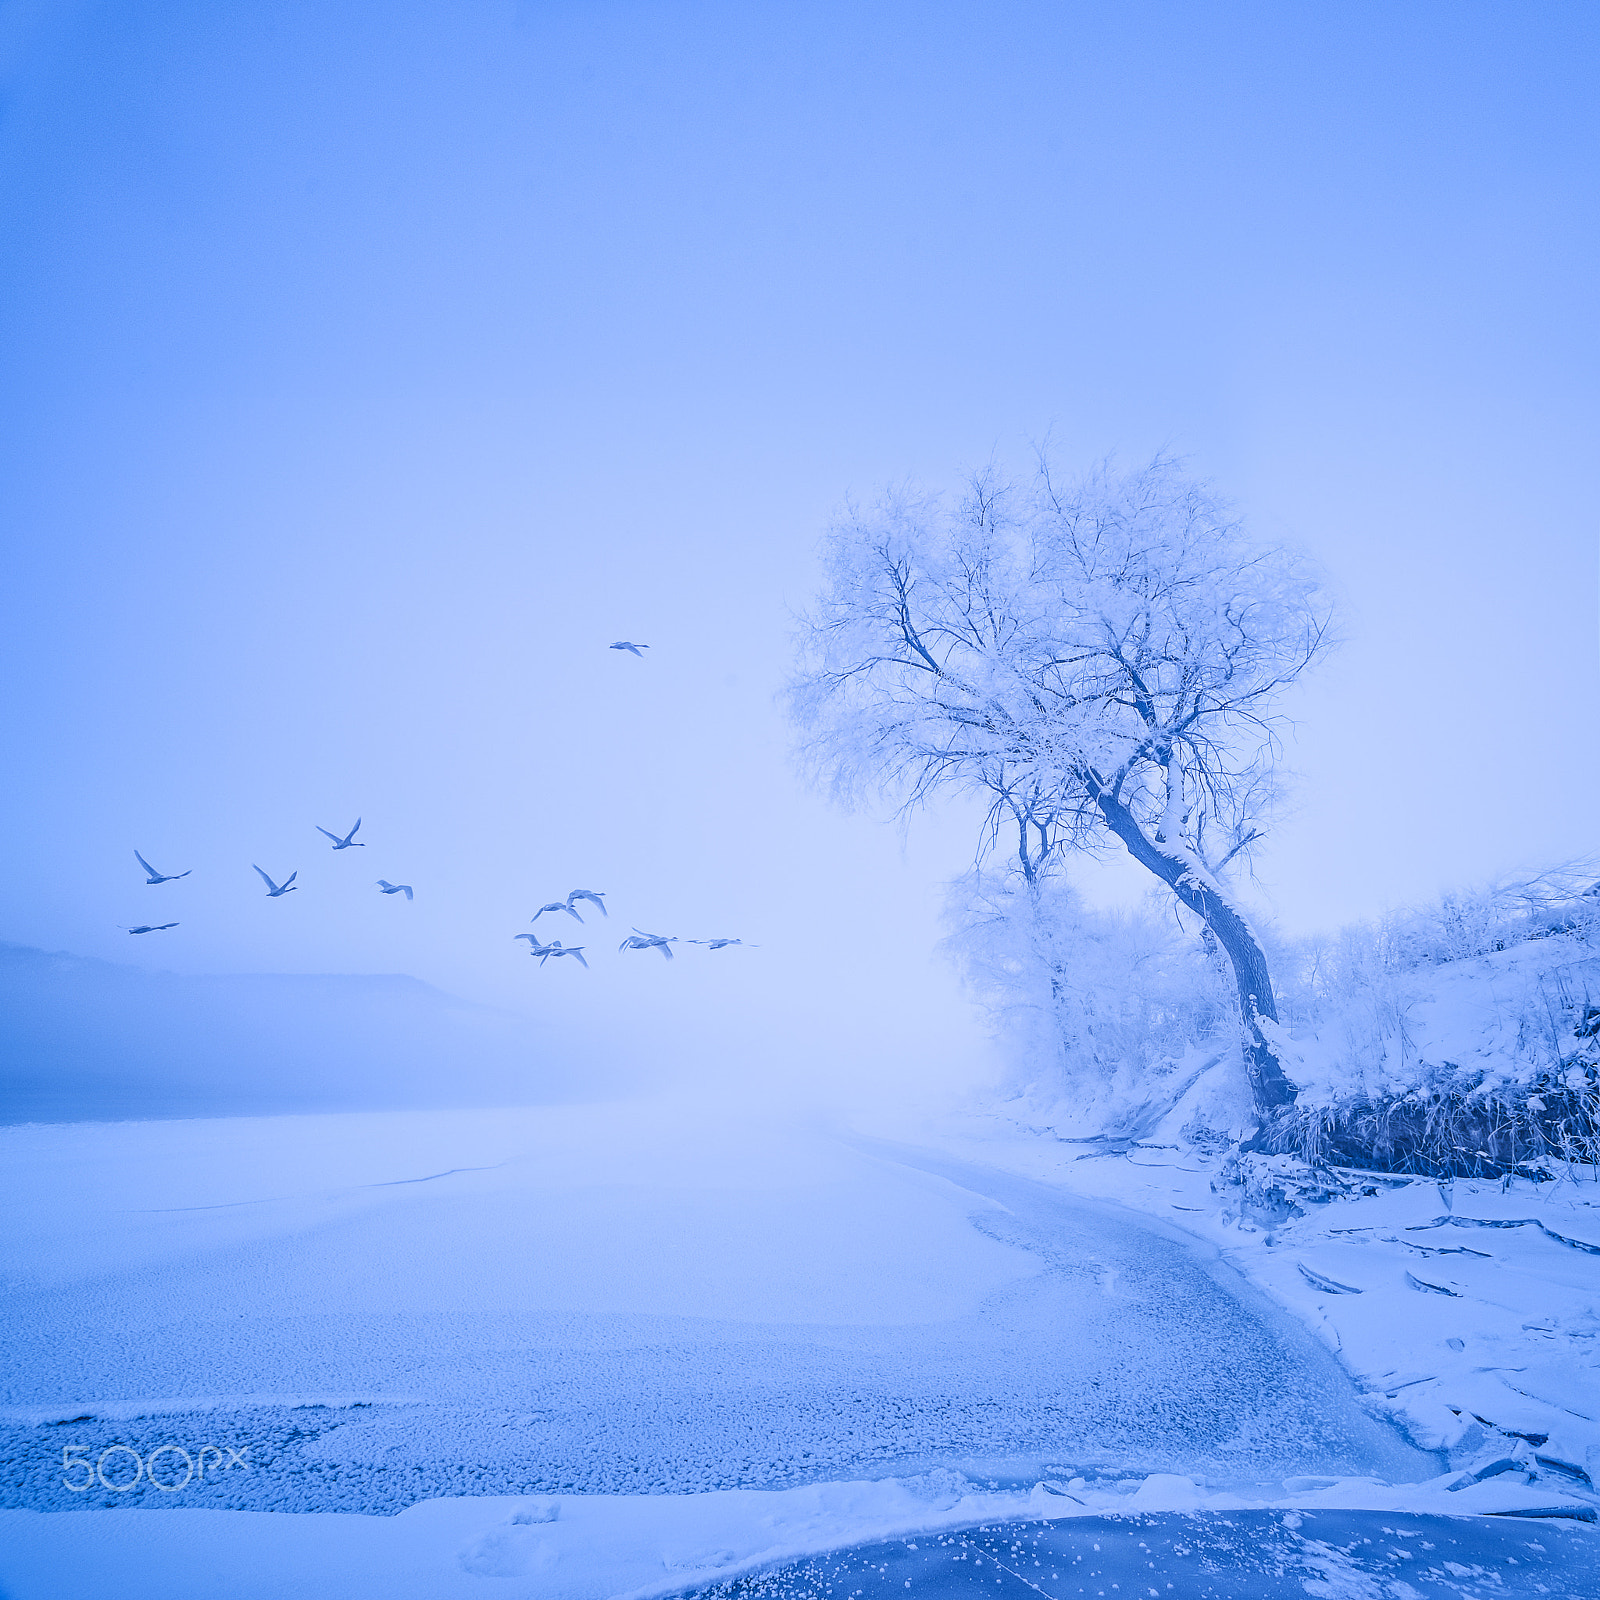 Nikon D800 + Tamron SP AF 10-24mm F3.5-4.5 Di II LD Aspherical (IF) sample photo. The dream was blue. photography